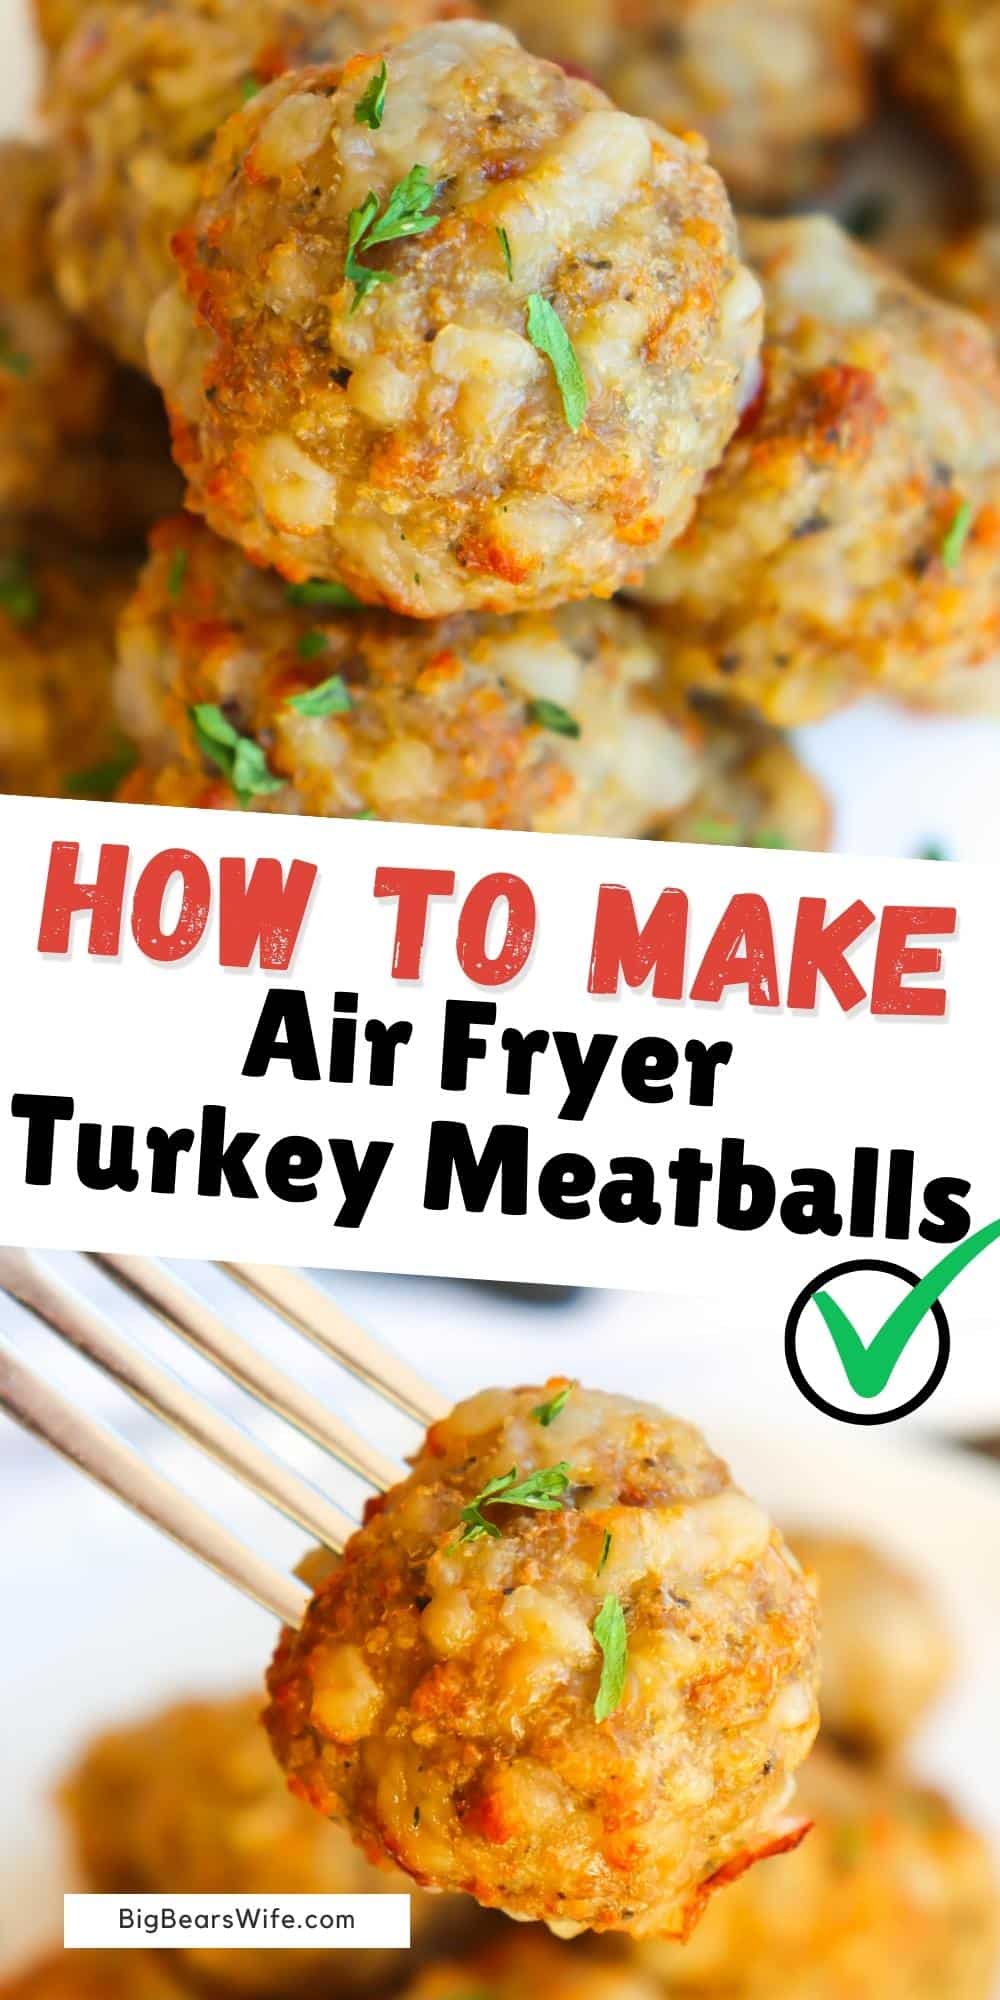 If you're looking for a healthy air fryer recipe, these Air Fryer Turkey Meatballs are for you! These are great for eating on their own, perfect for parties or great for spaghetti and meatballs!  via @bigbearswife